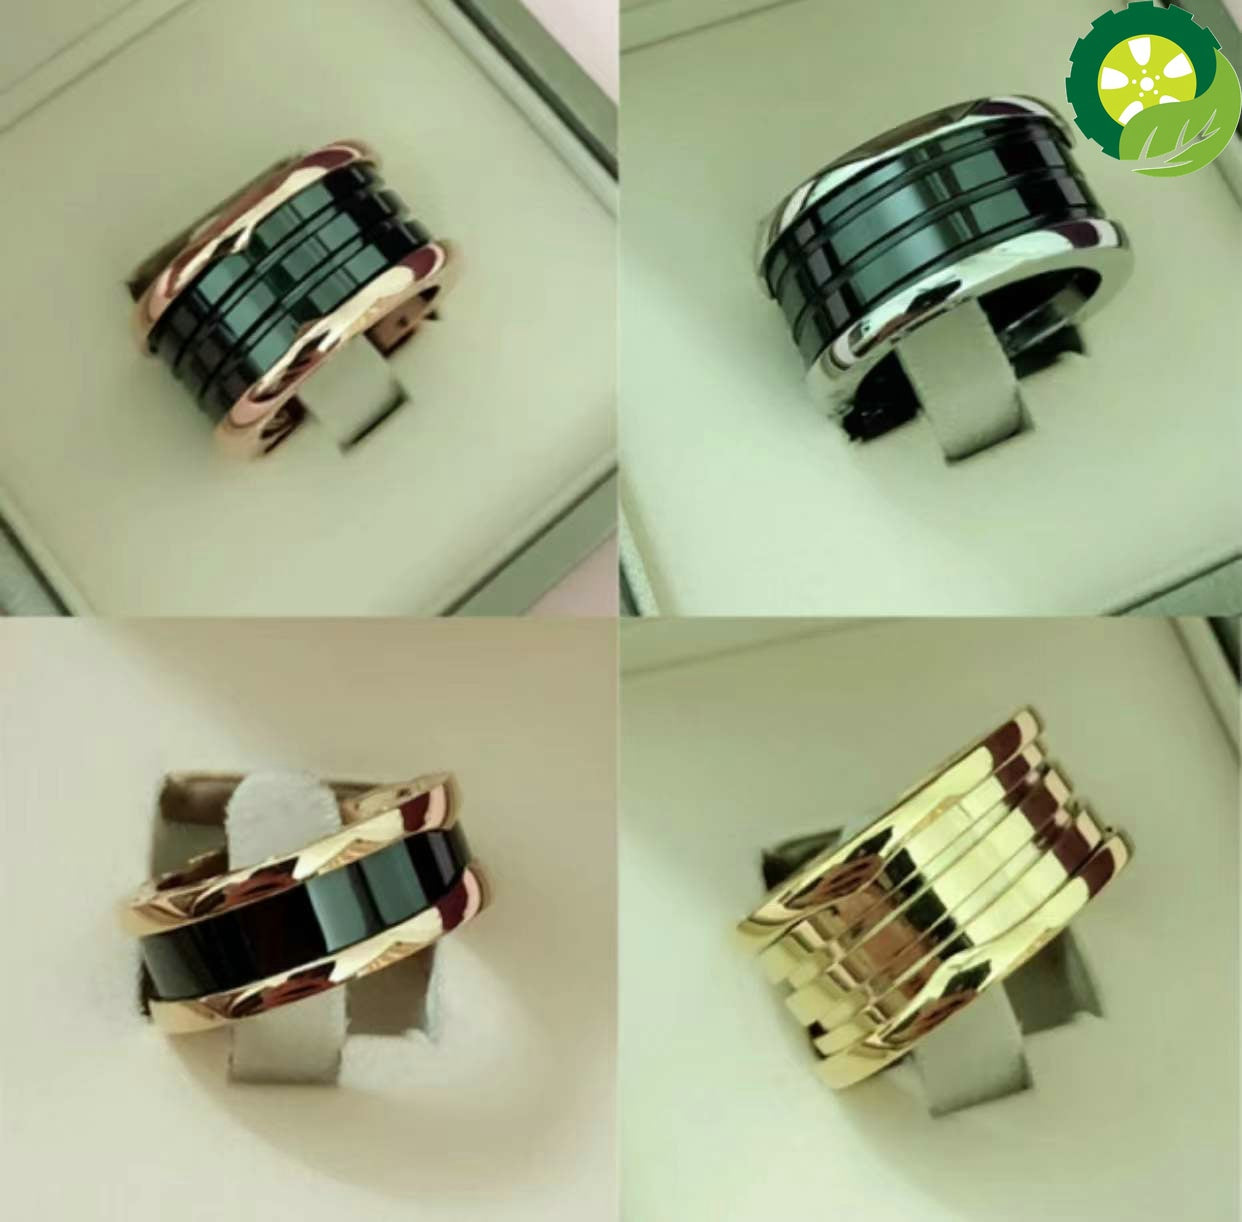 B S925 charm classic couple ring TIANTIAN LIFE Market Place